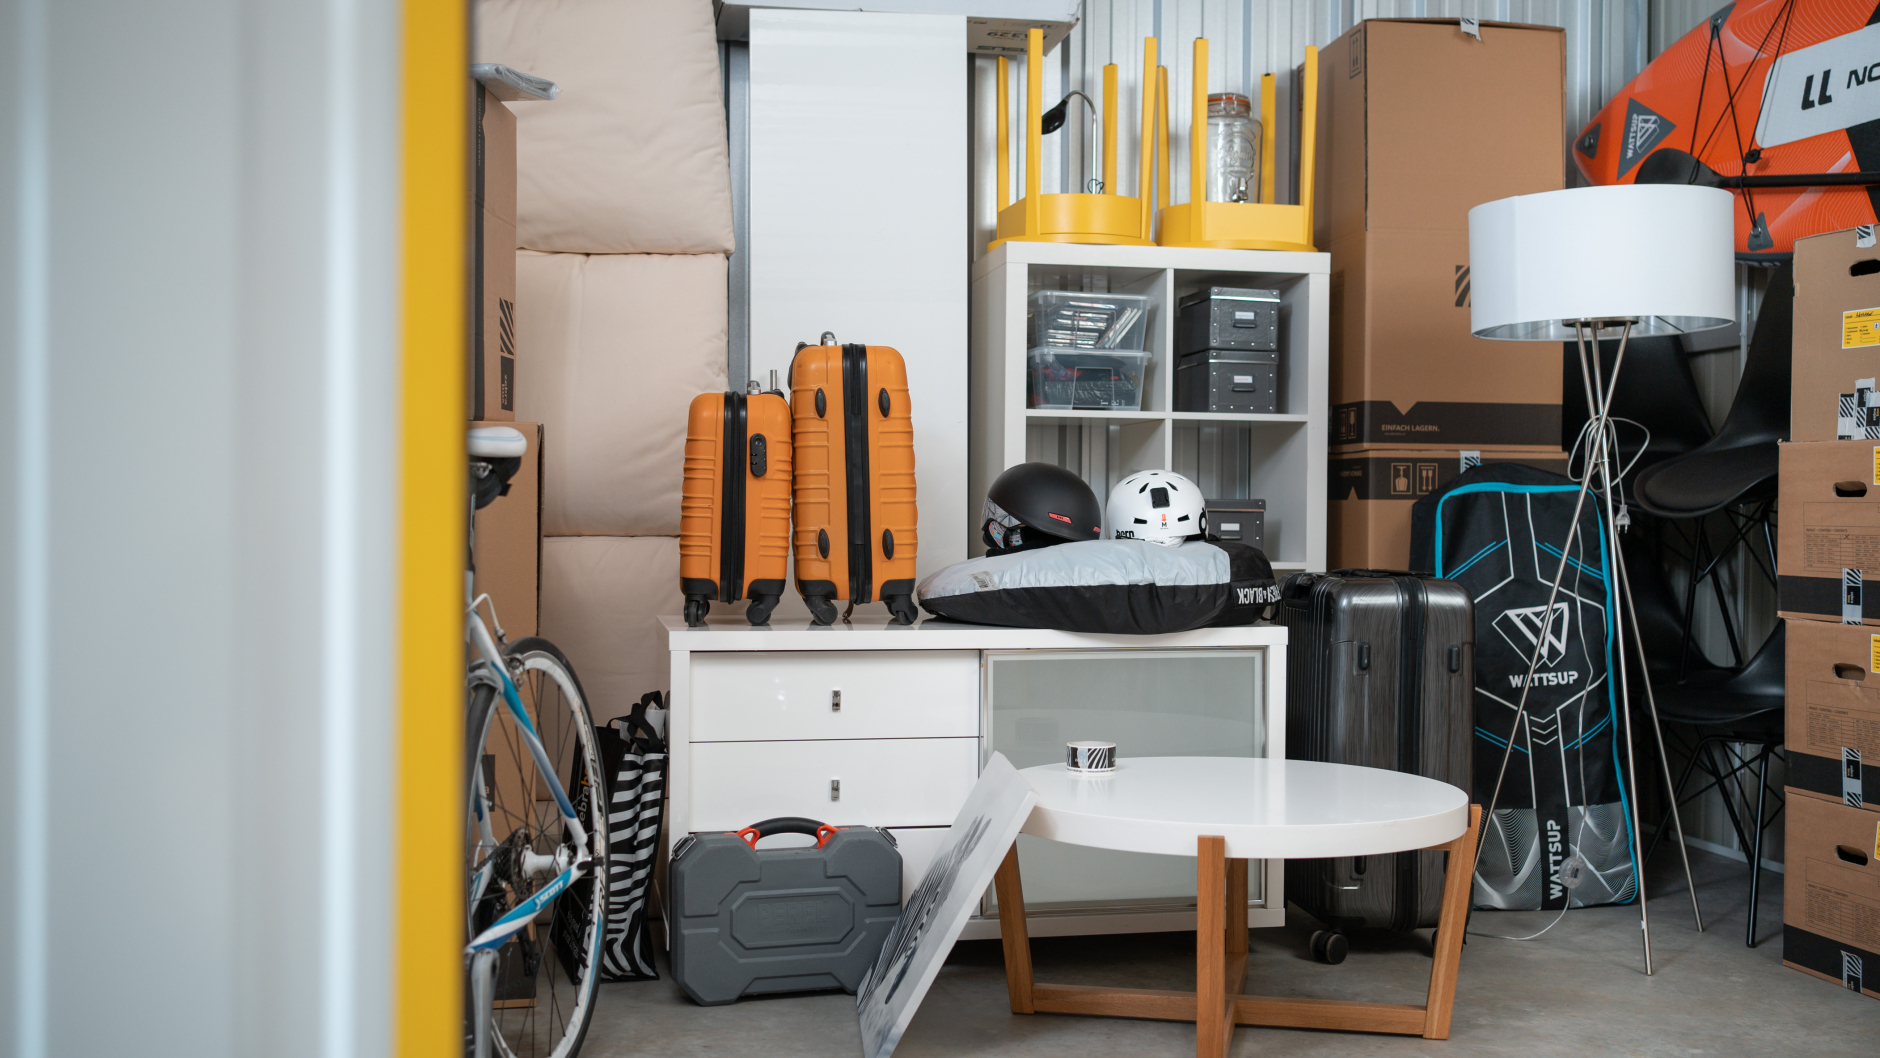 A storage unit at Zebrabox filled with household items, sports equipment and moving boxes.